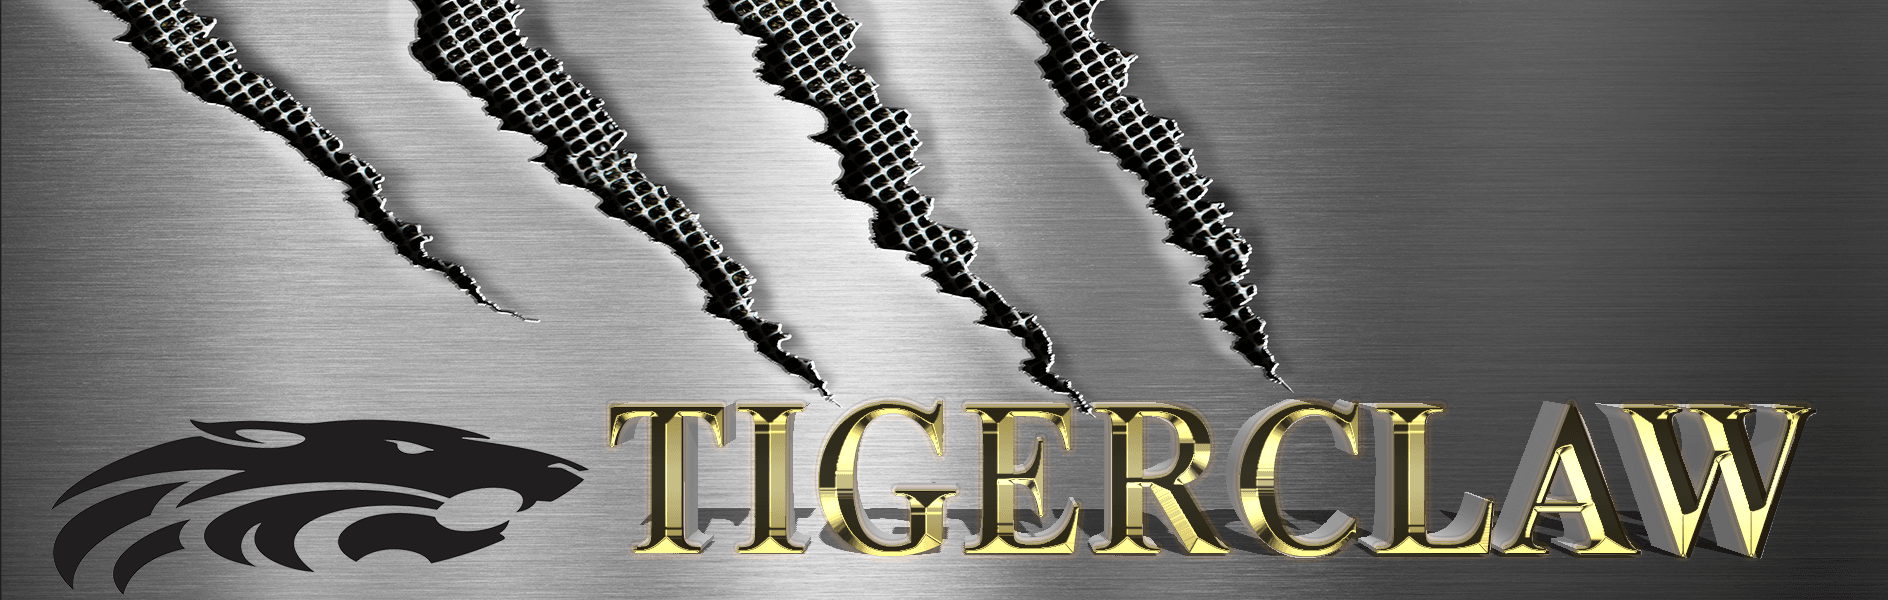 TIGER-CLAW banner